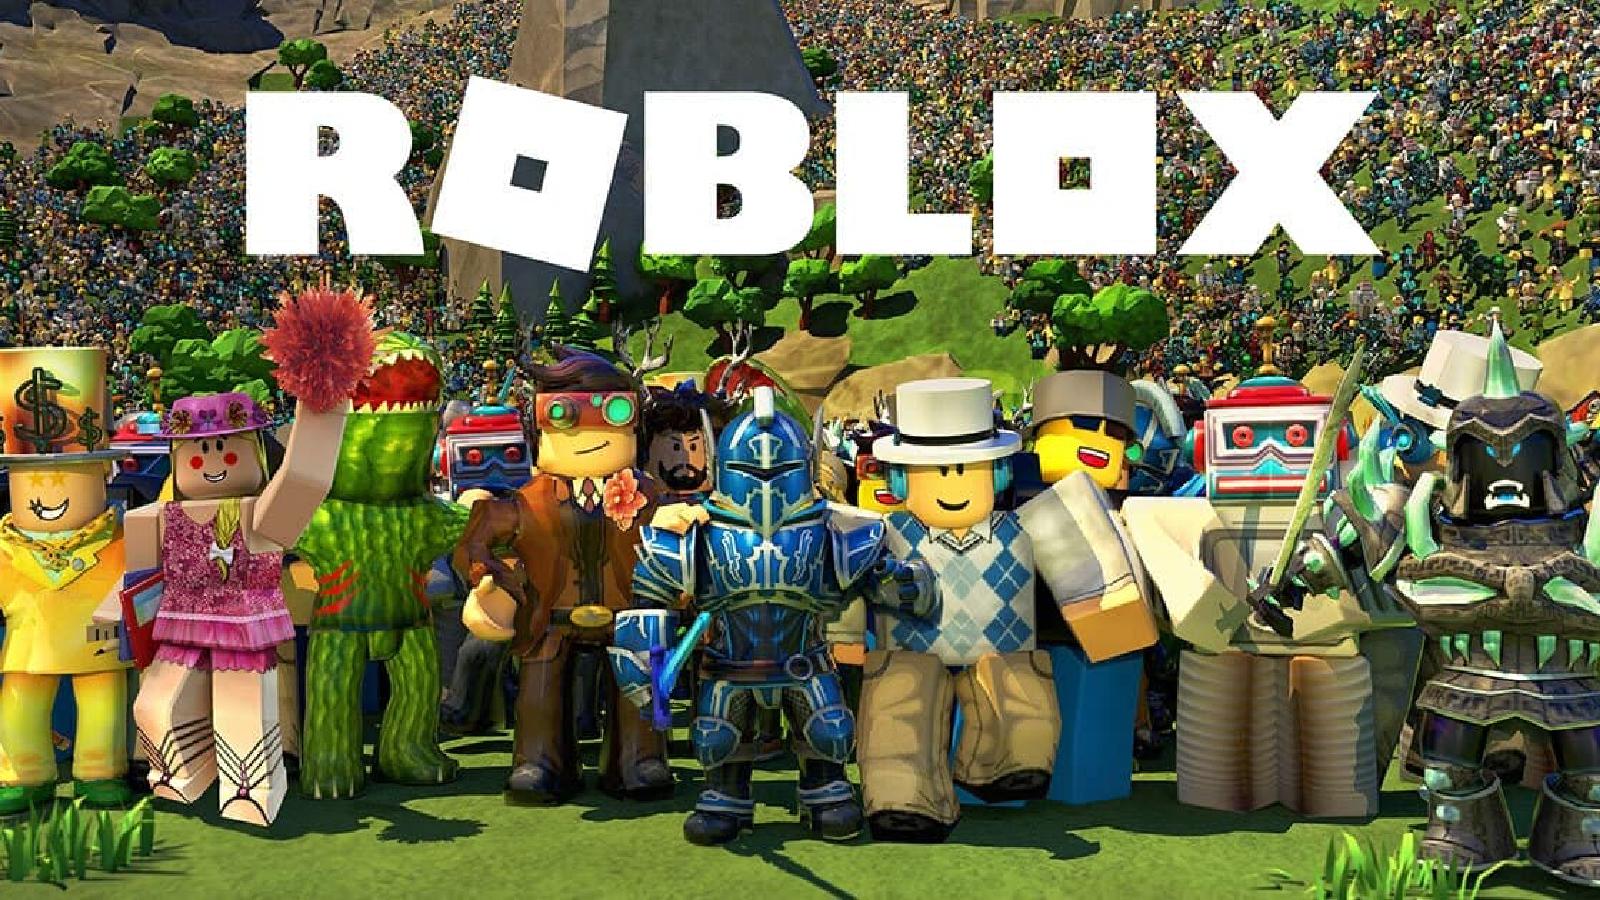 Roblox named in lawsuit claiming game is grooming children